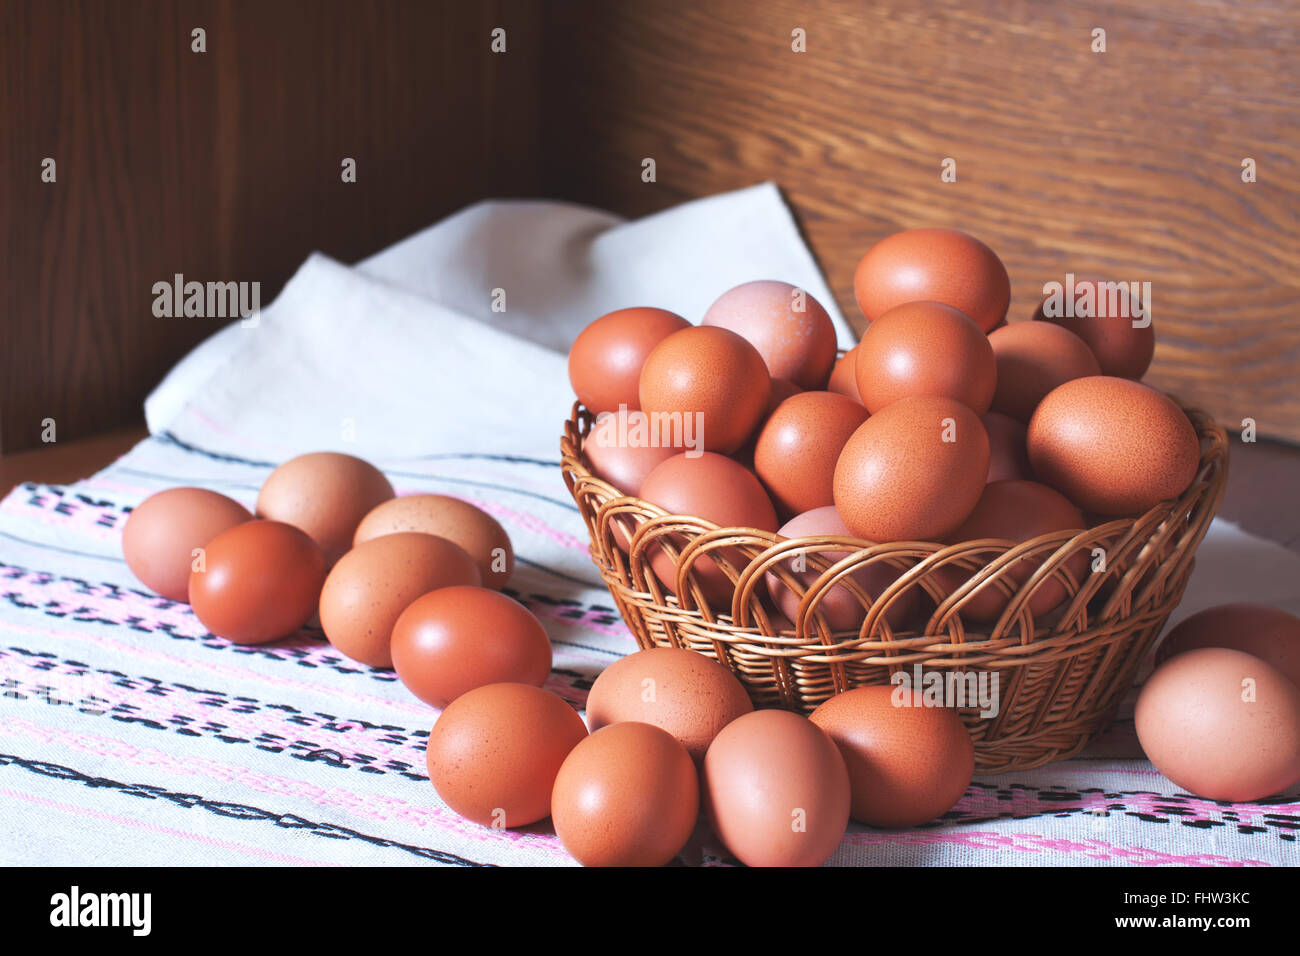 Heap of raw fresh chicken eggs in a wooven basket. Food stock image Stock Photo